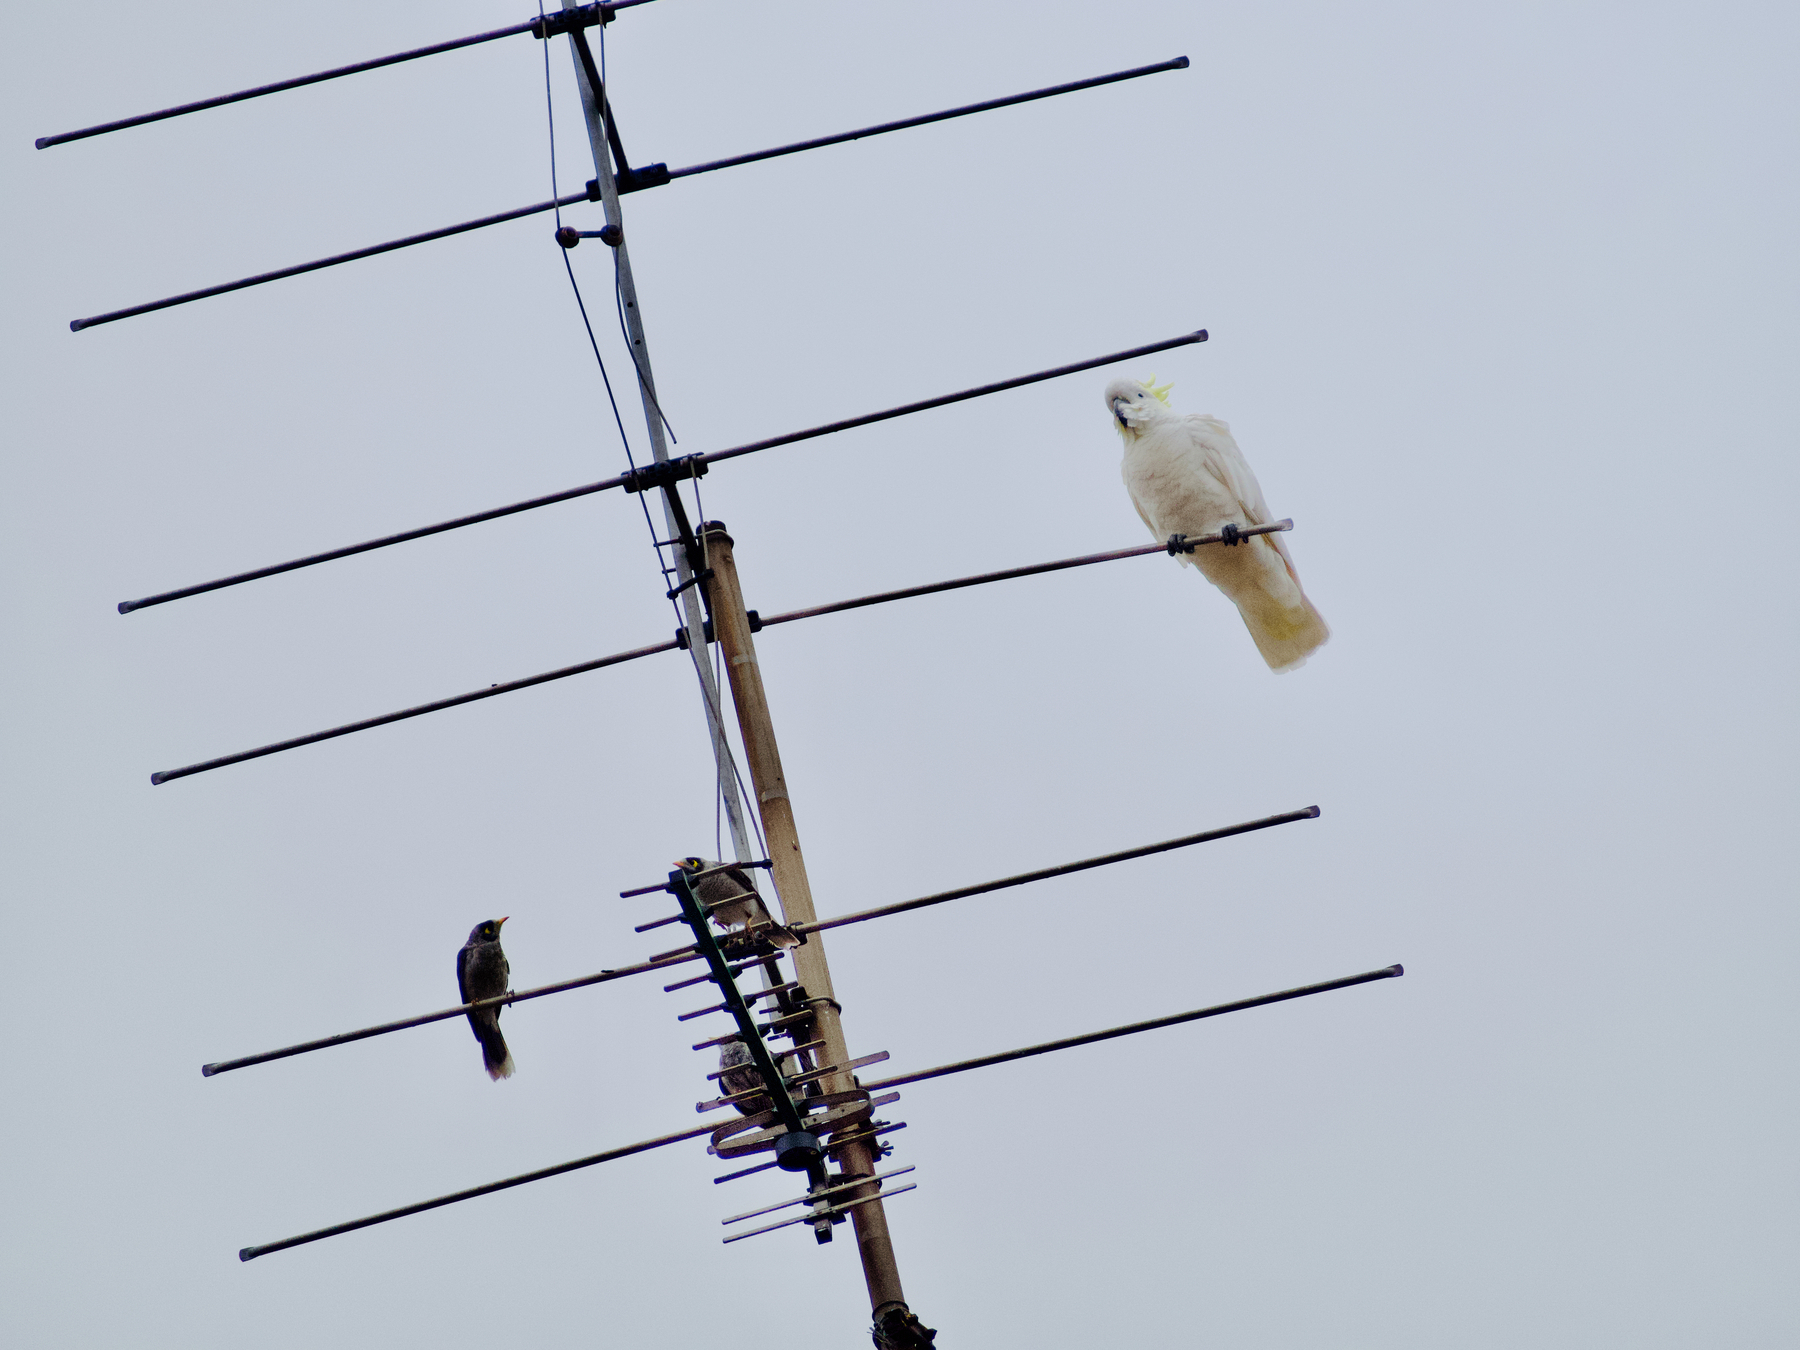 A cockatoo sits perched on a TV antenna, higher than another bird.